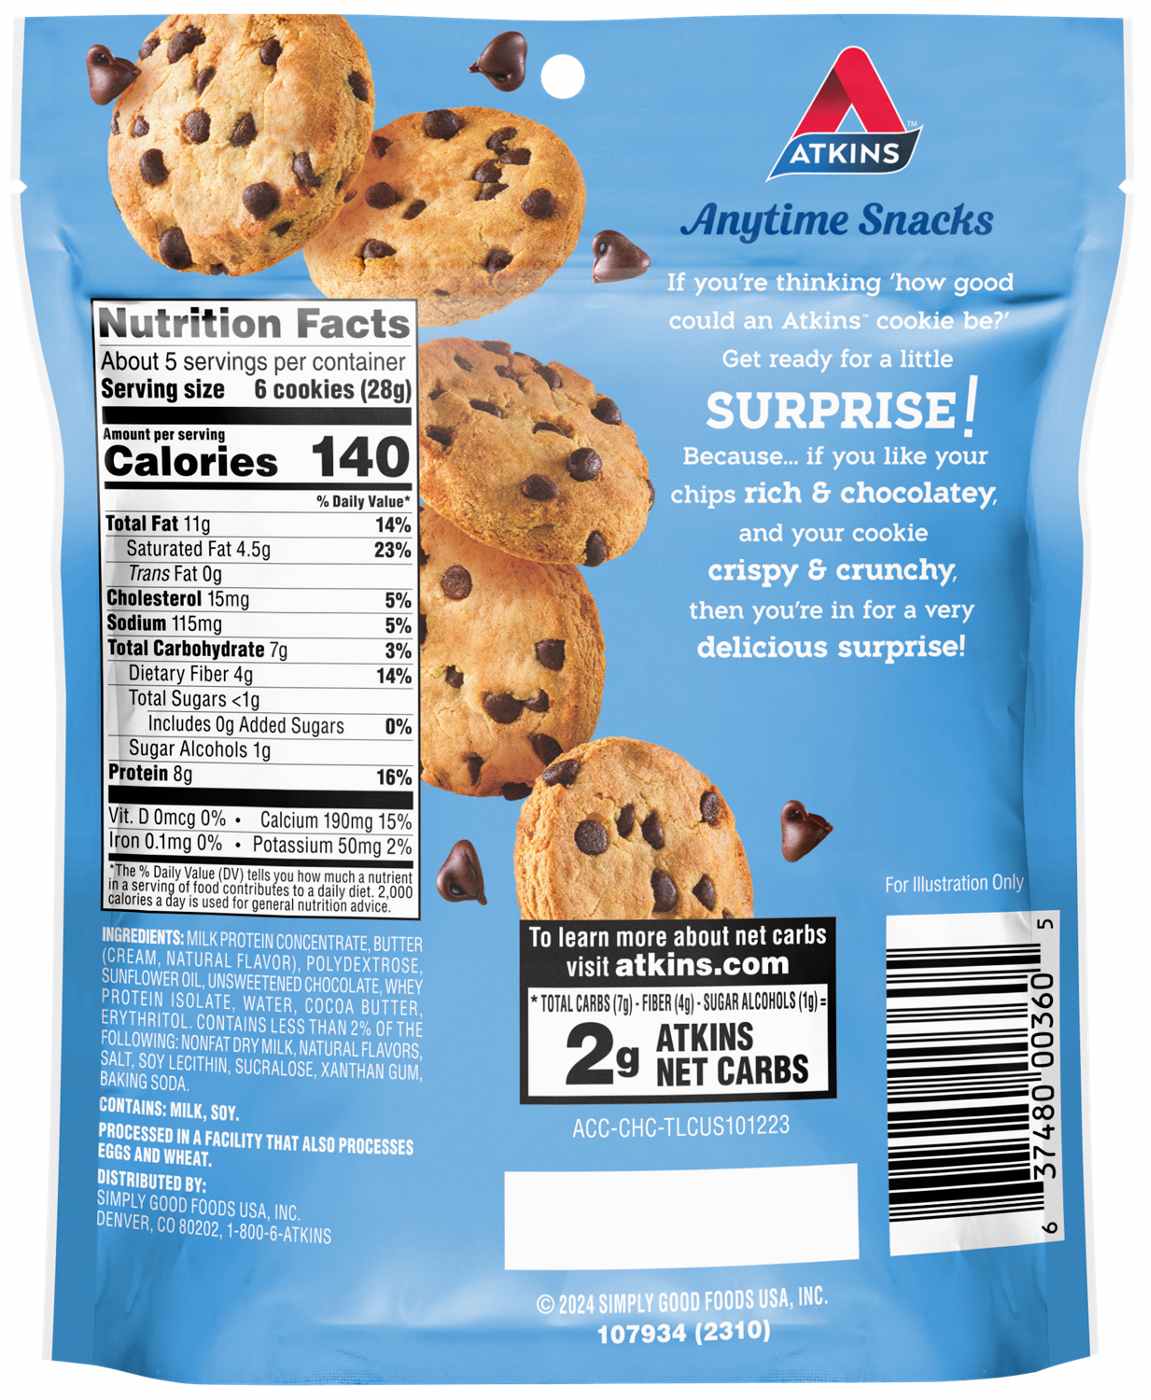 Atkins Crunchy Protein Cookies 8g - Chocolate Chip; image 2 of 2